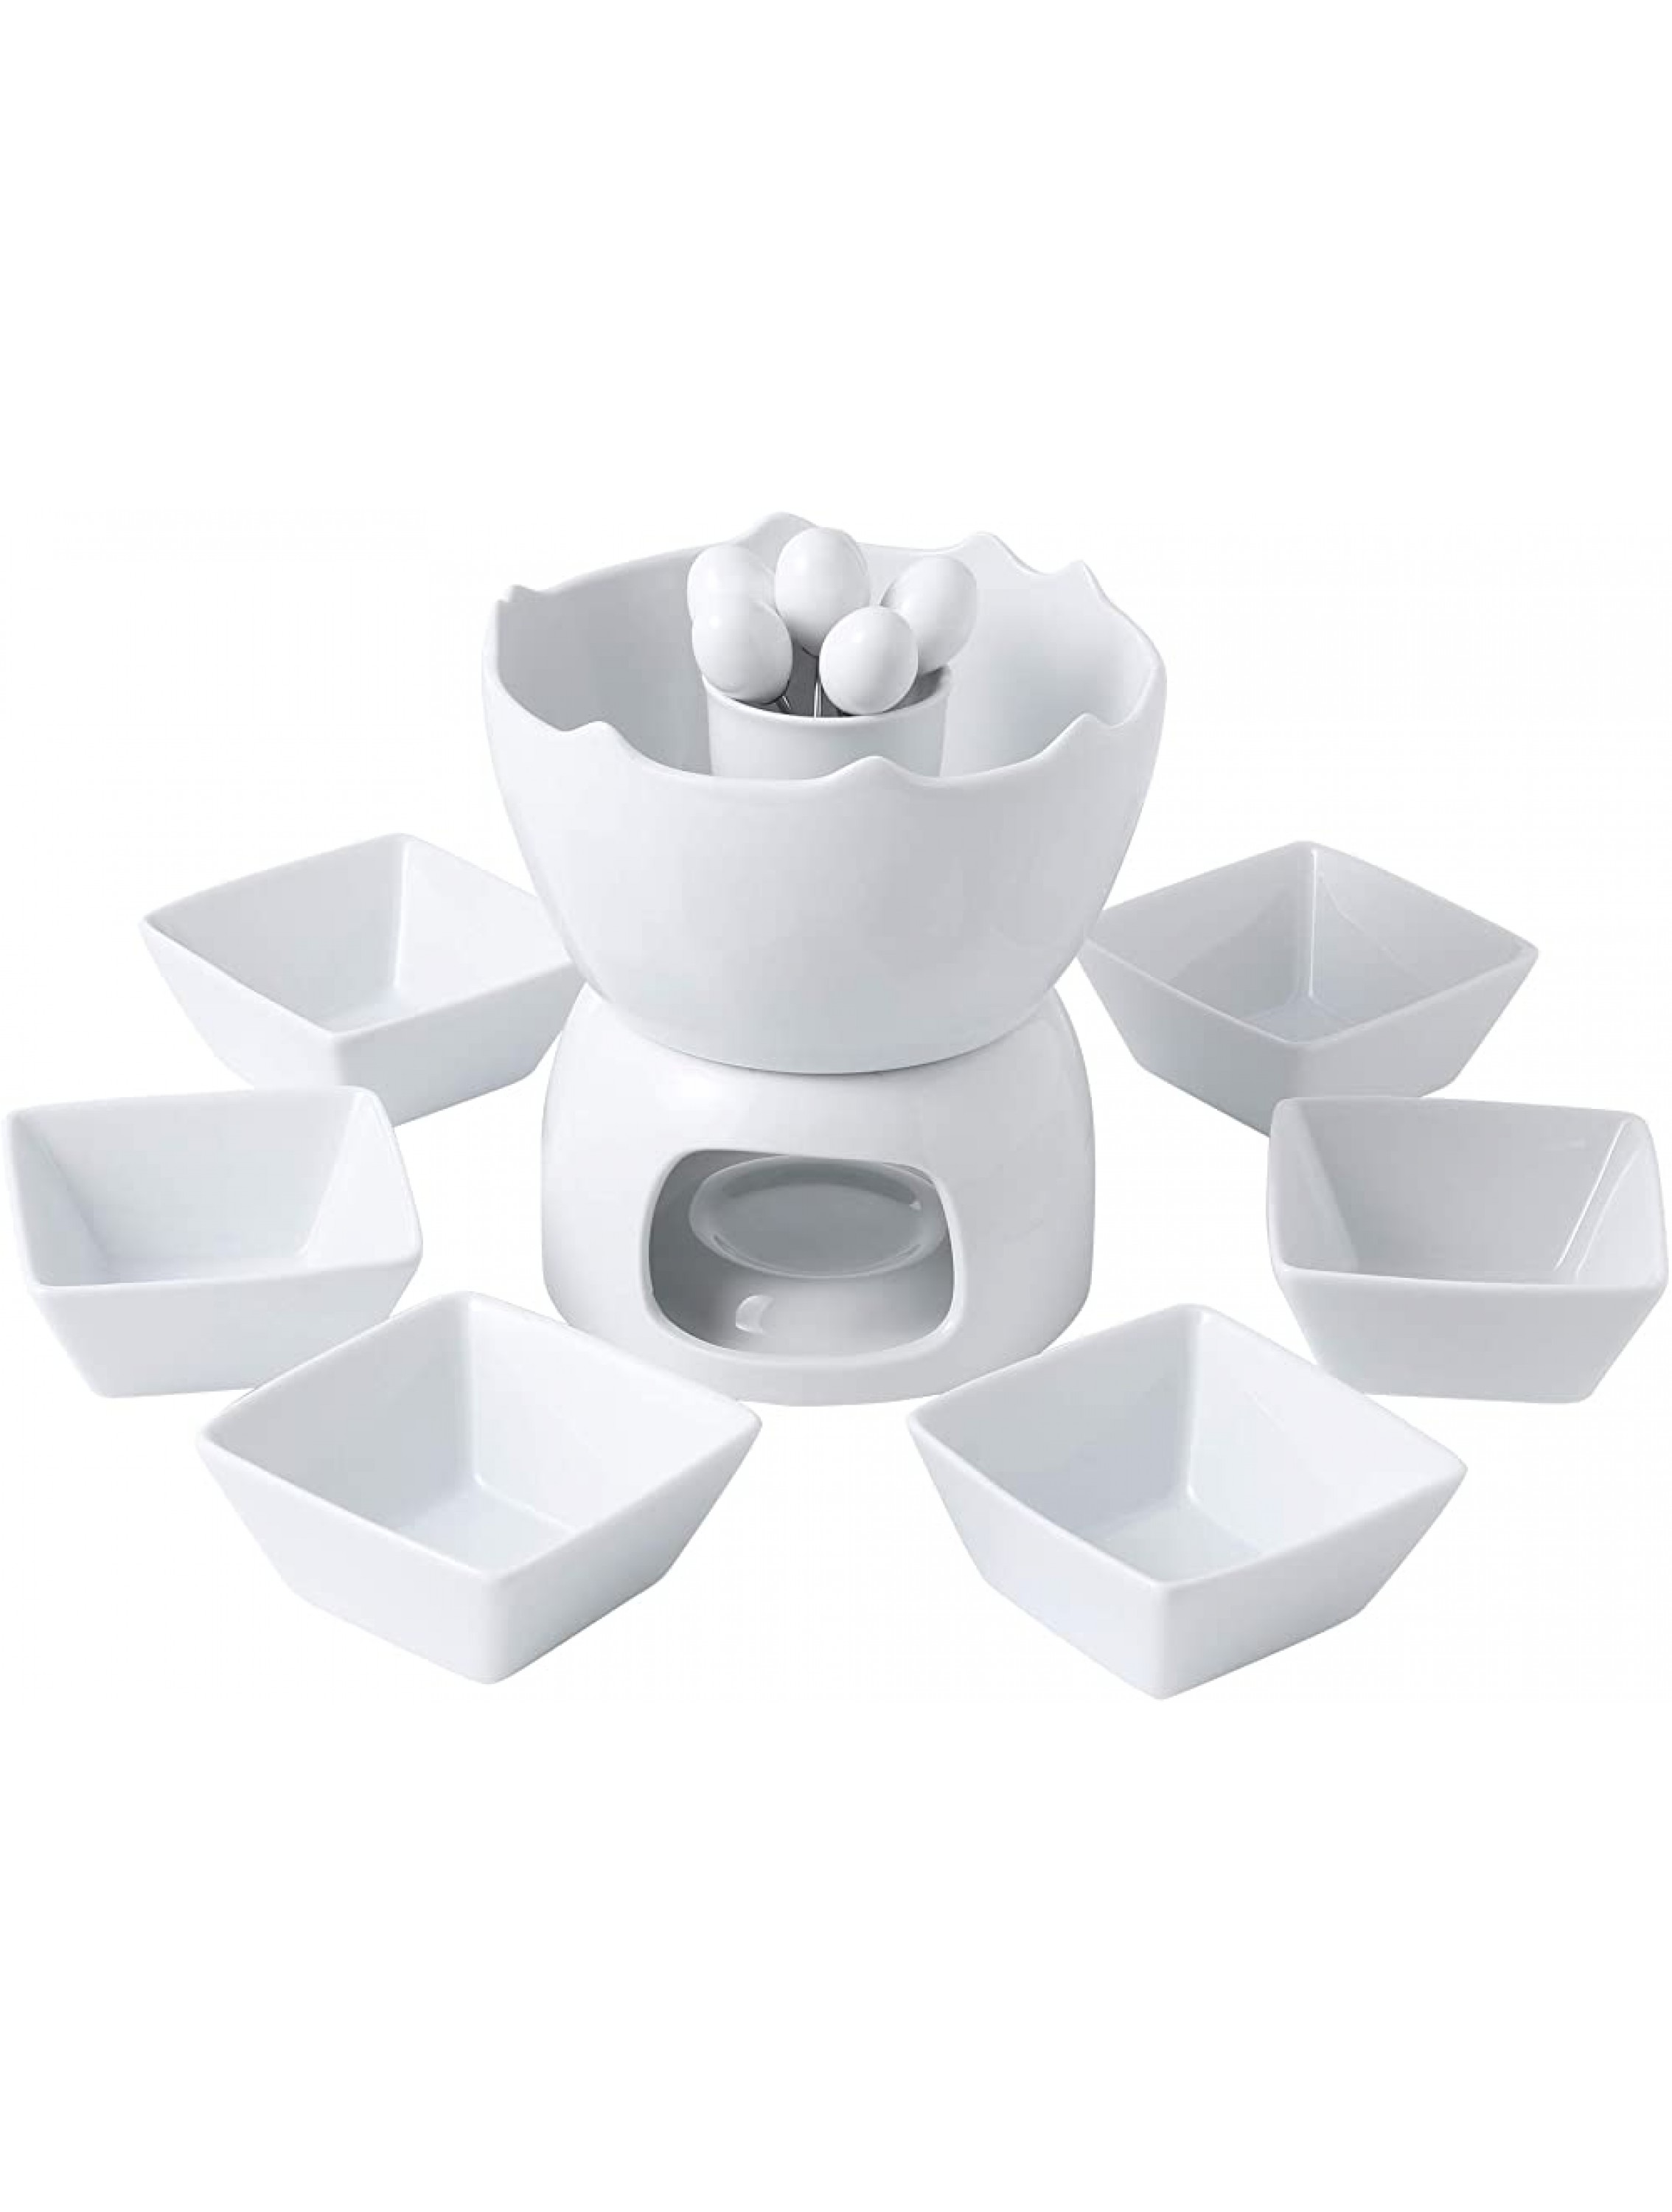 MALACASA Fondue Pot Set Two-layer Porcelain Tealight Chocolate Fondue with Dipping Bowls and Forks for 6 Cheese Fondue or Butter Fondue Set White - BESJAS1YM